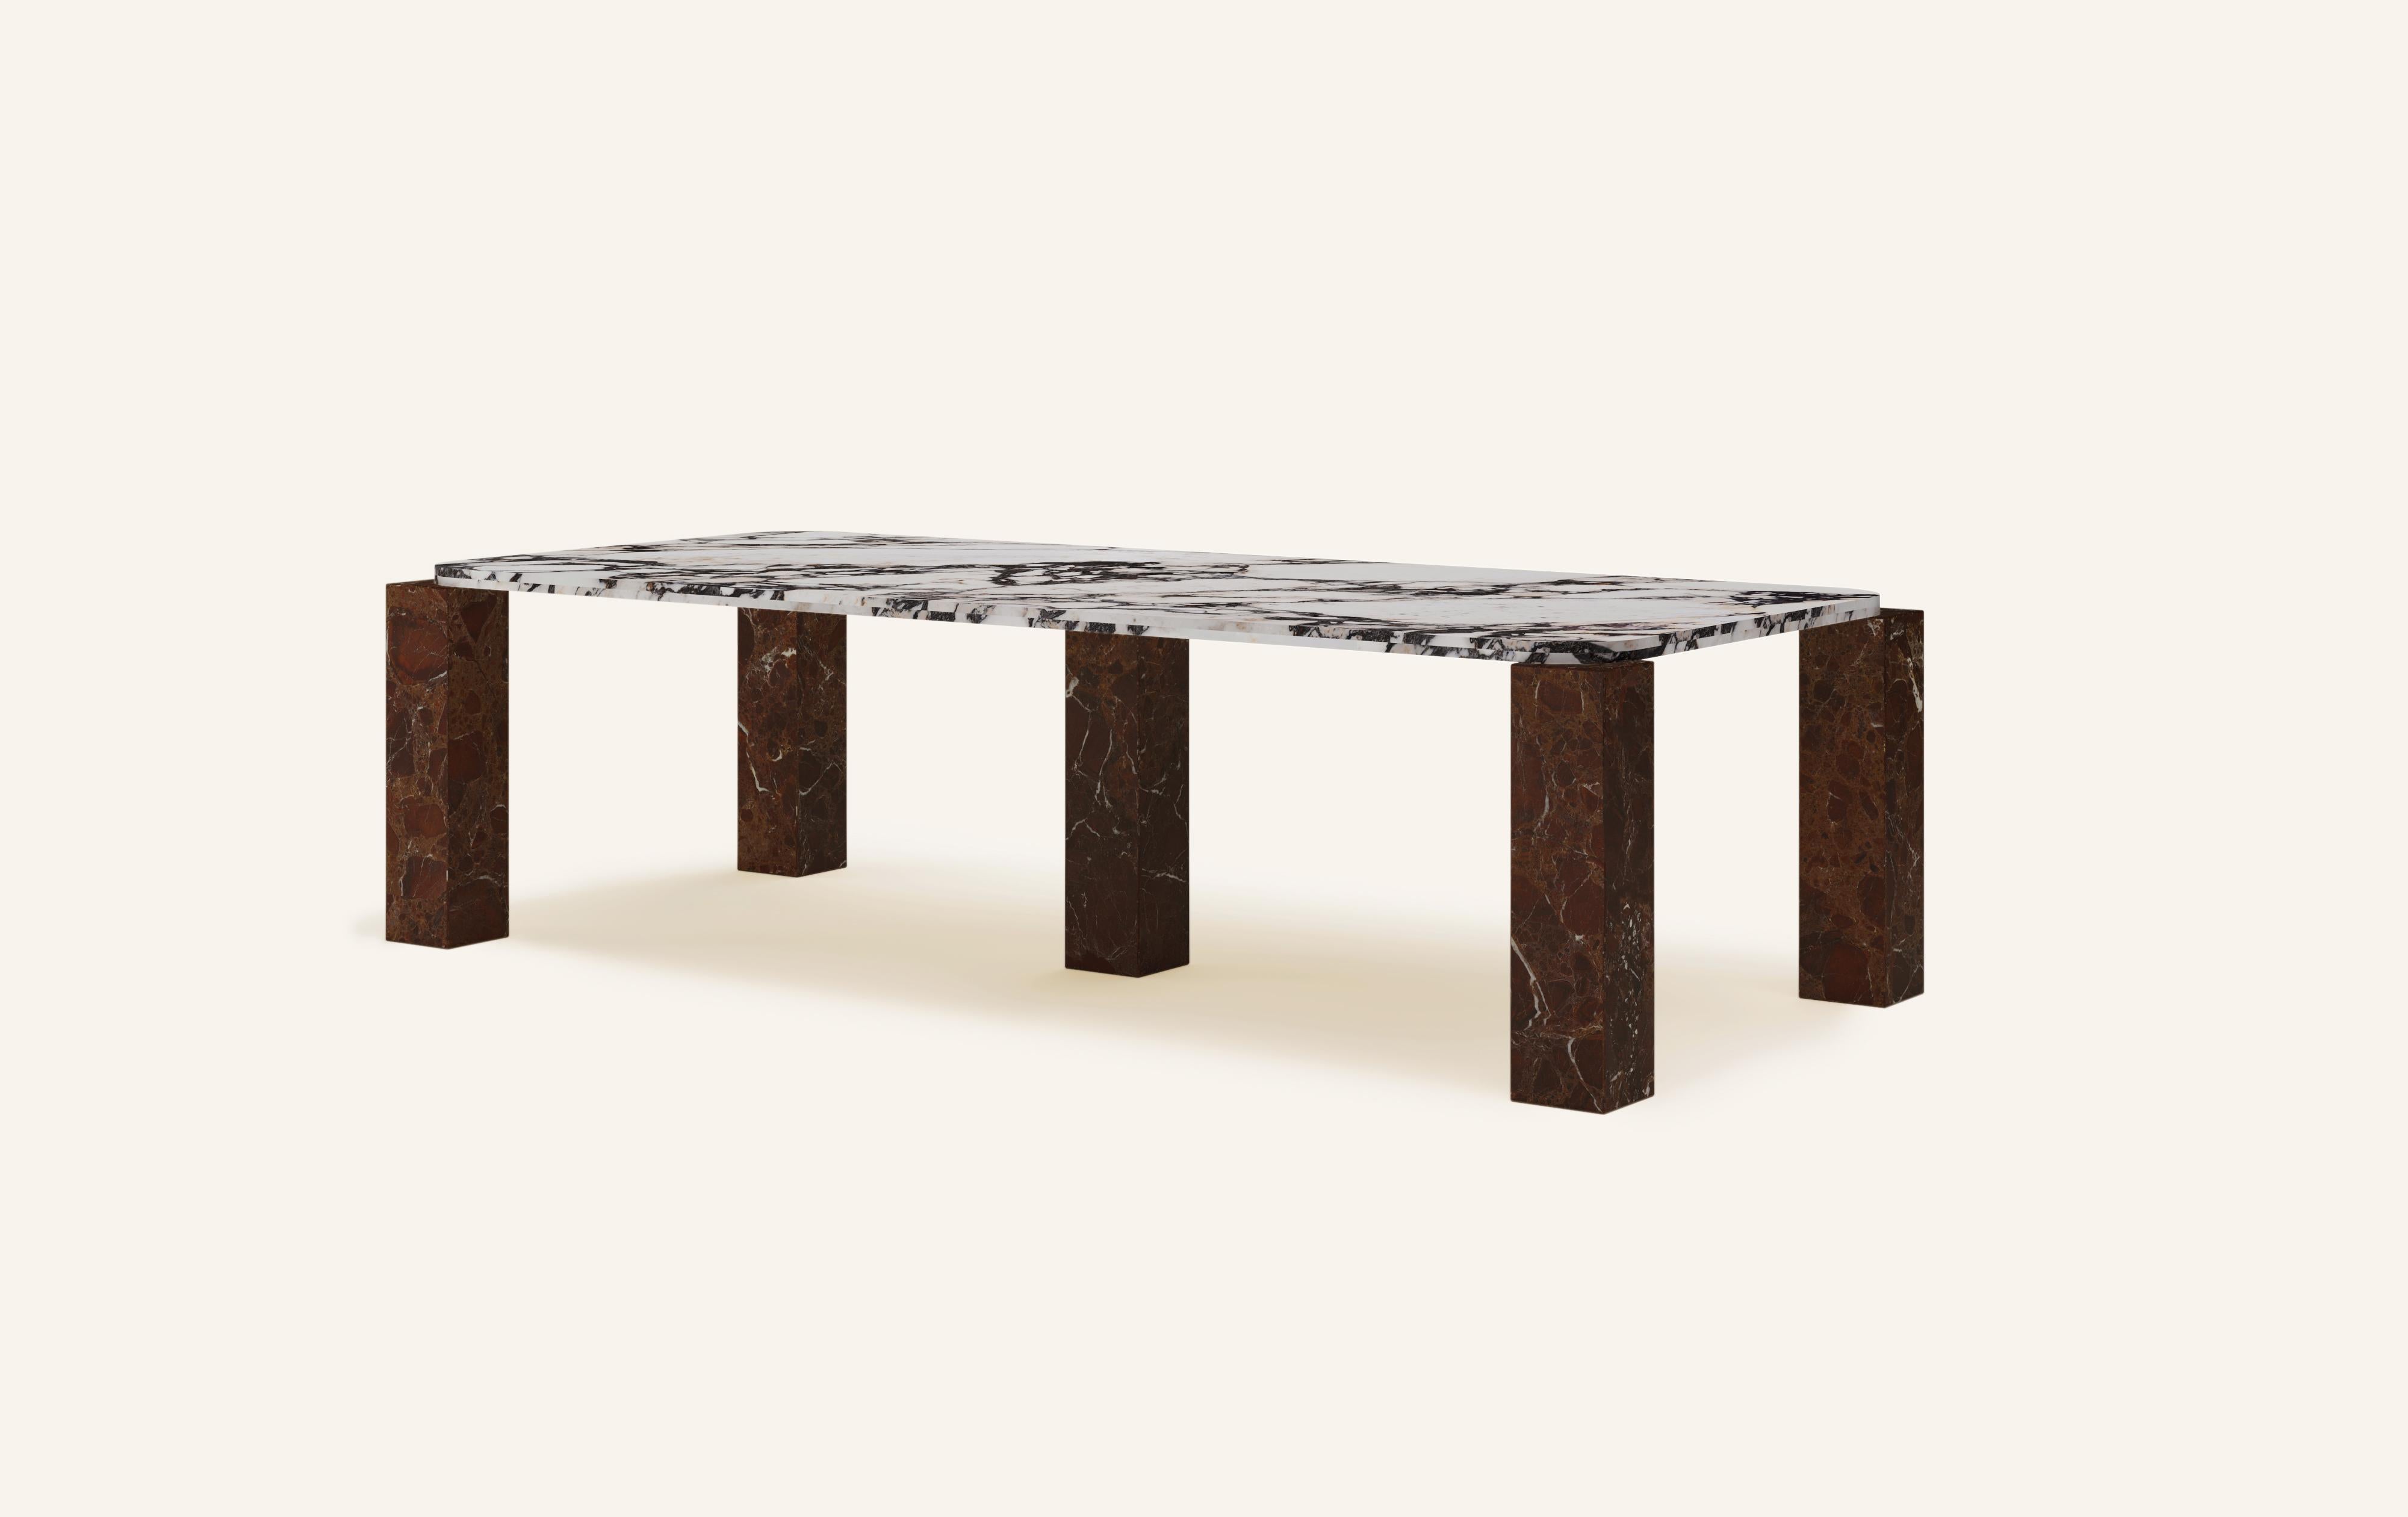 Organic Modern FORM(LA) Cubo Rectangle Dining Table 98”L x 44”W x 30”H Viola & Rosso Marble For Sale